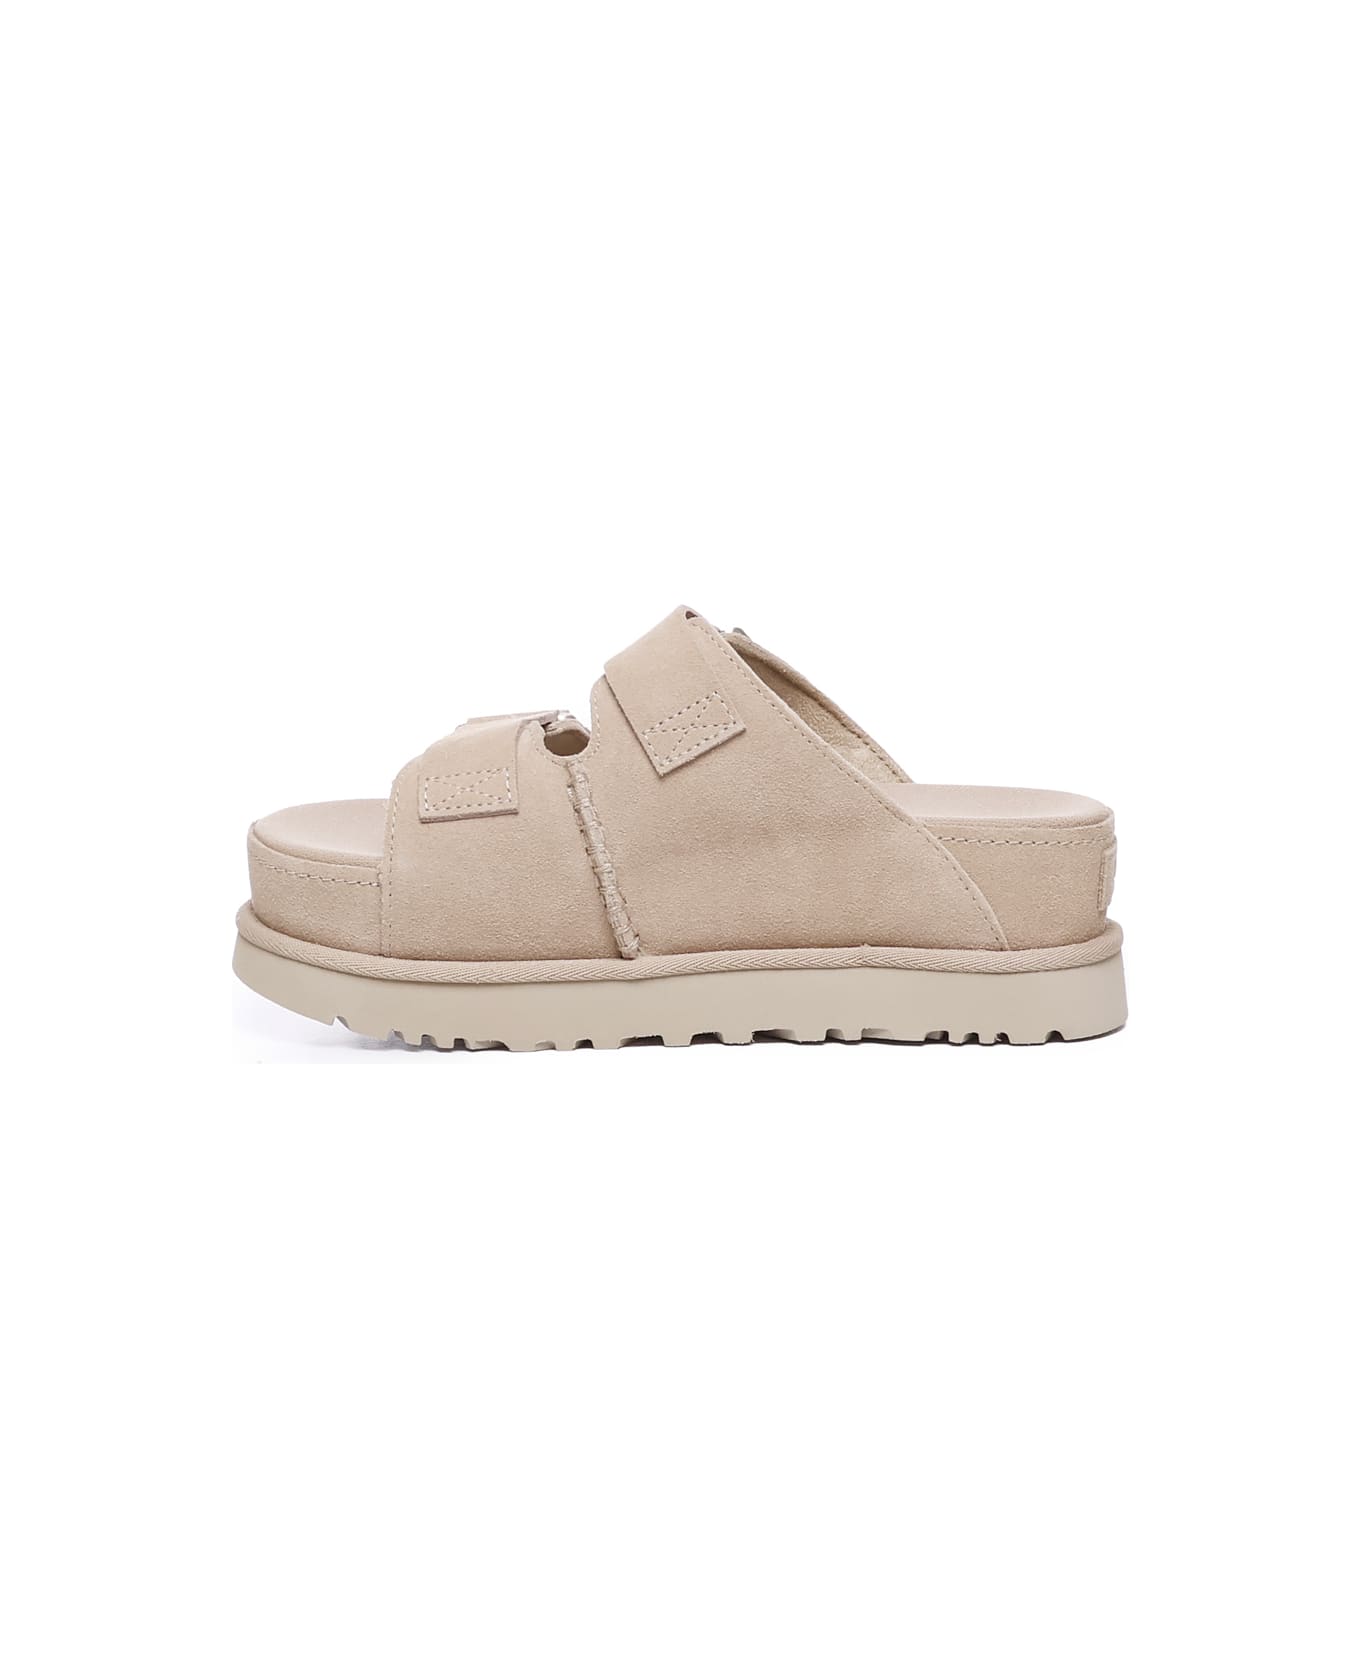 UGG Suede Sandals With Buckles - Nude サンダル